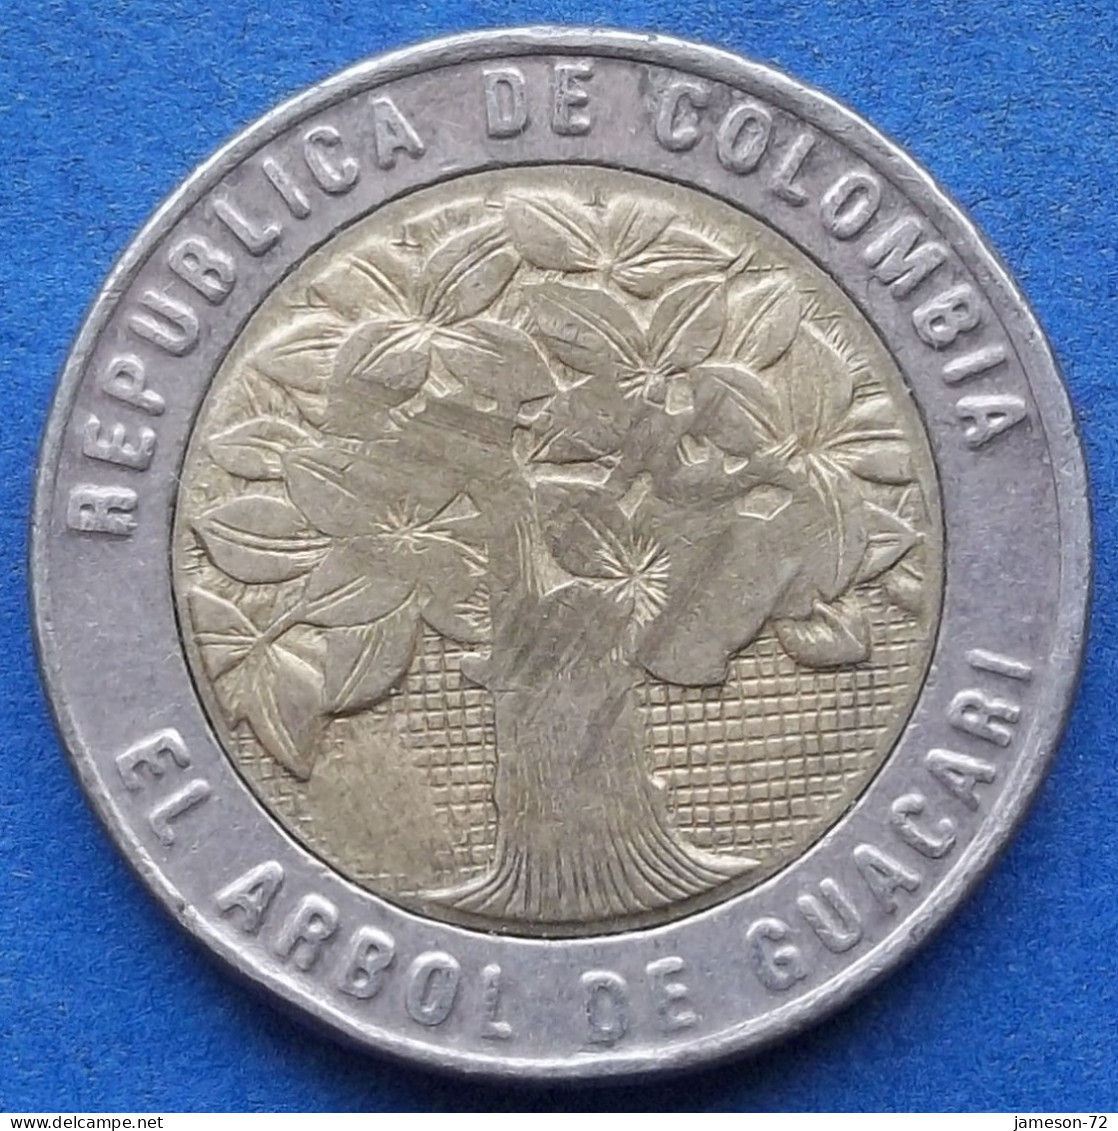 COLOMBIA - 500 Pesos 2008 "Guacari Tree" KM# 286 Republic - Edelweiss Coins - Colombie